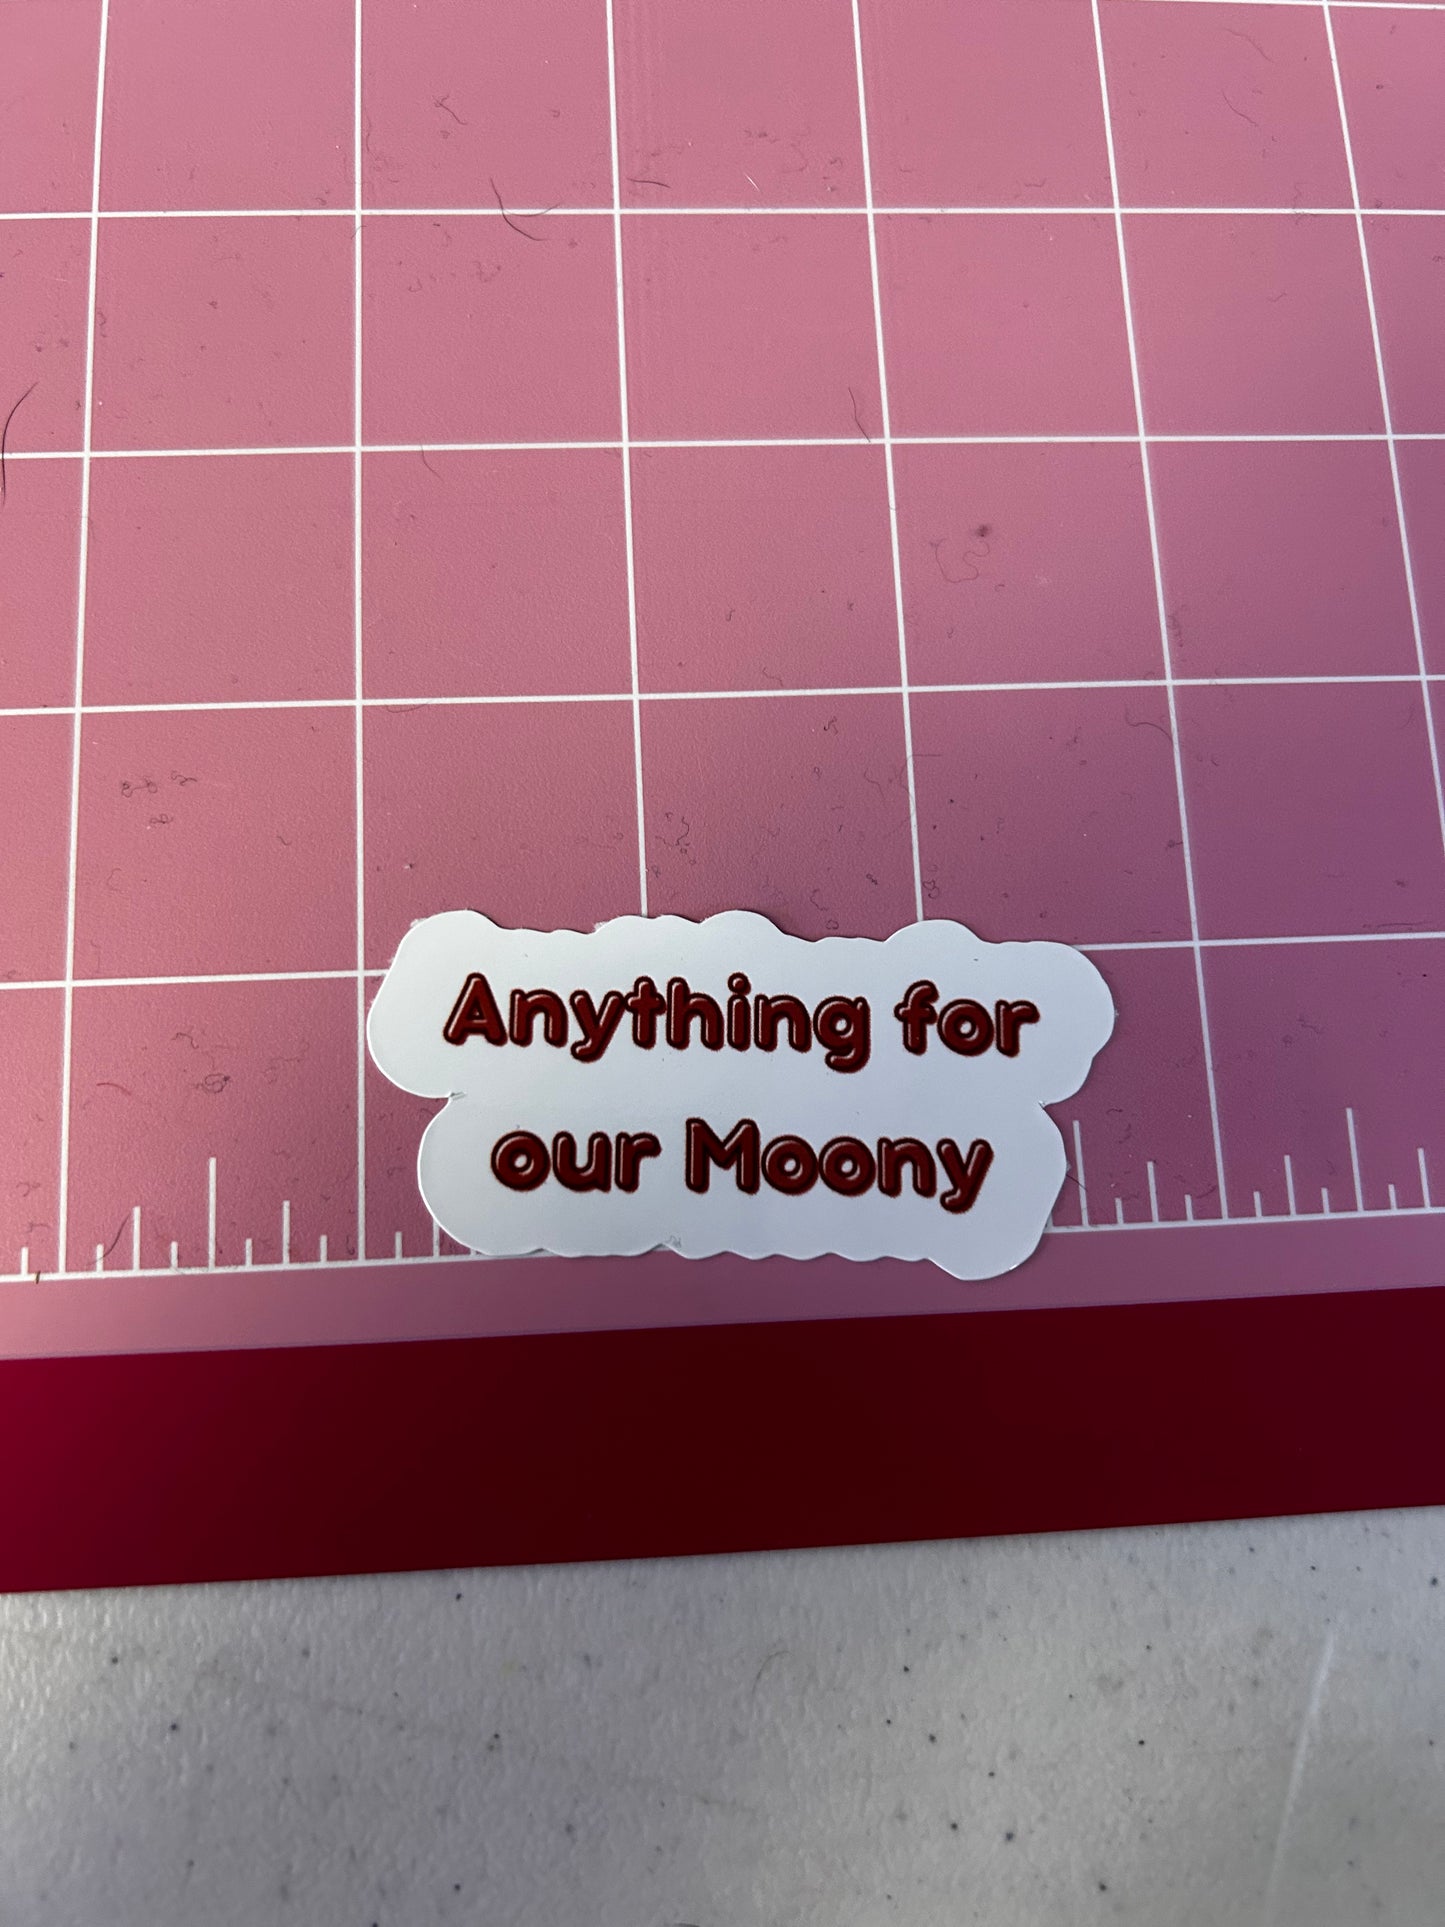 Anything for our moony sticker